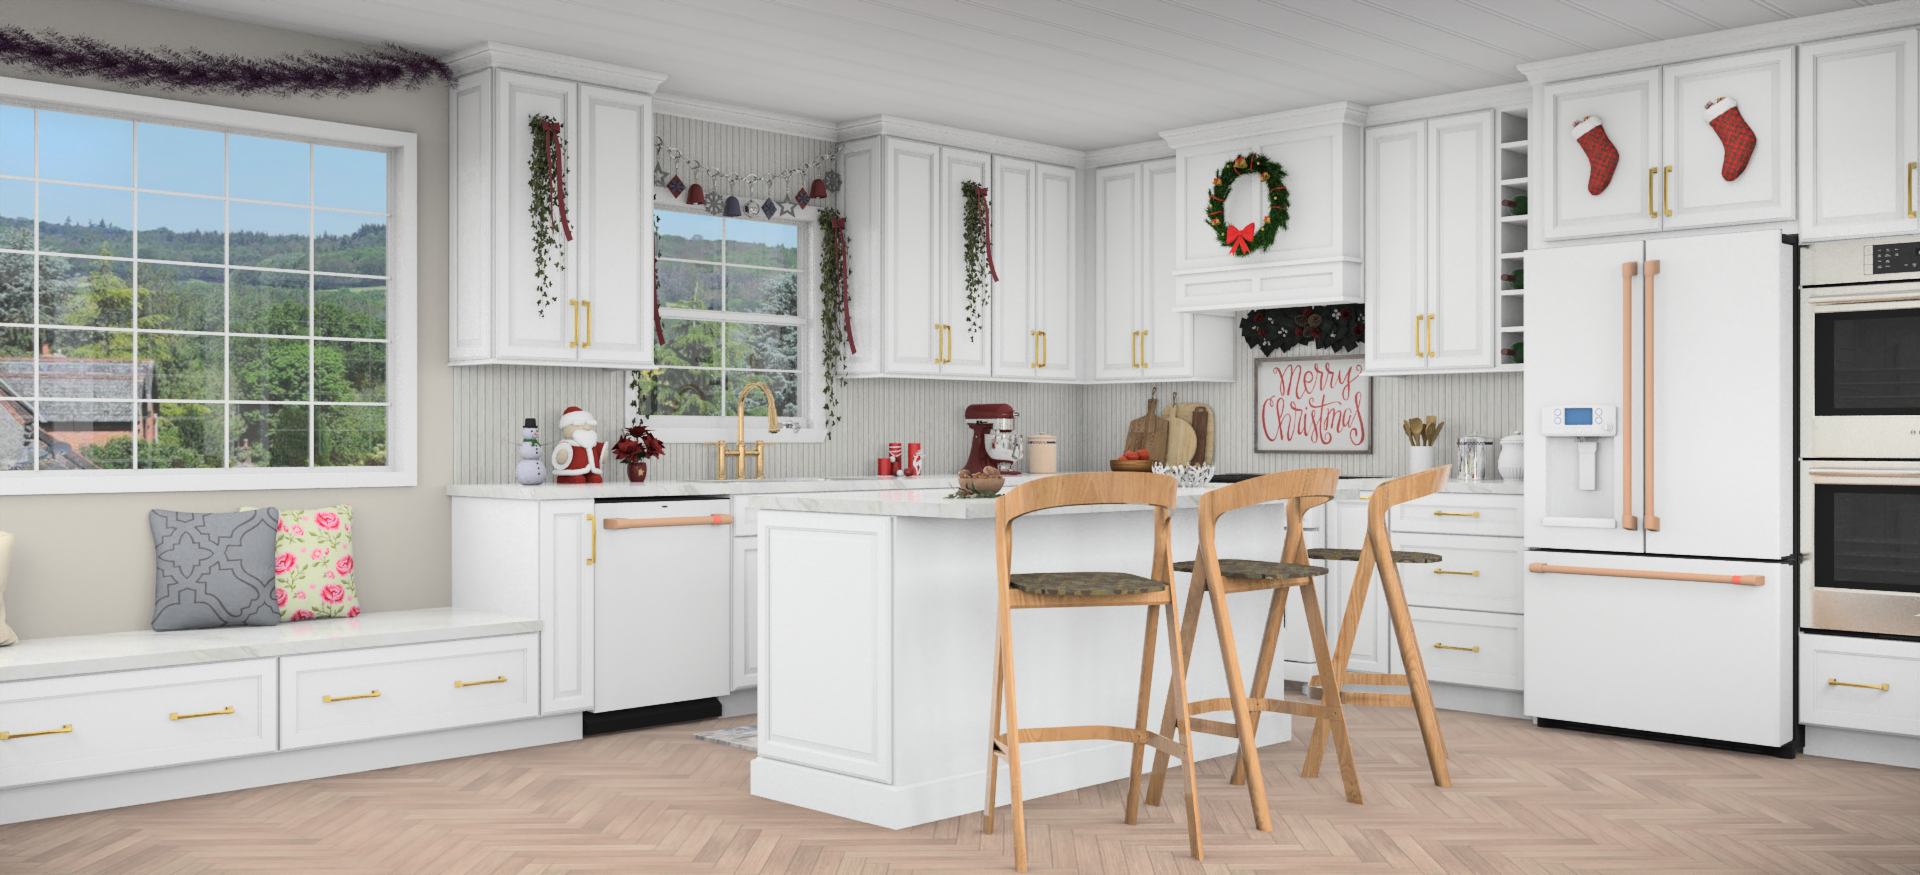 Classic Kitchen with Christmas Theme